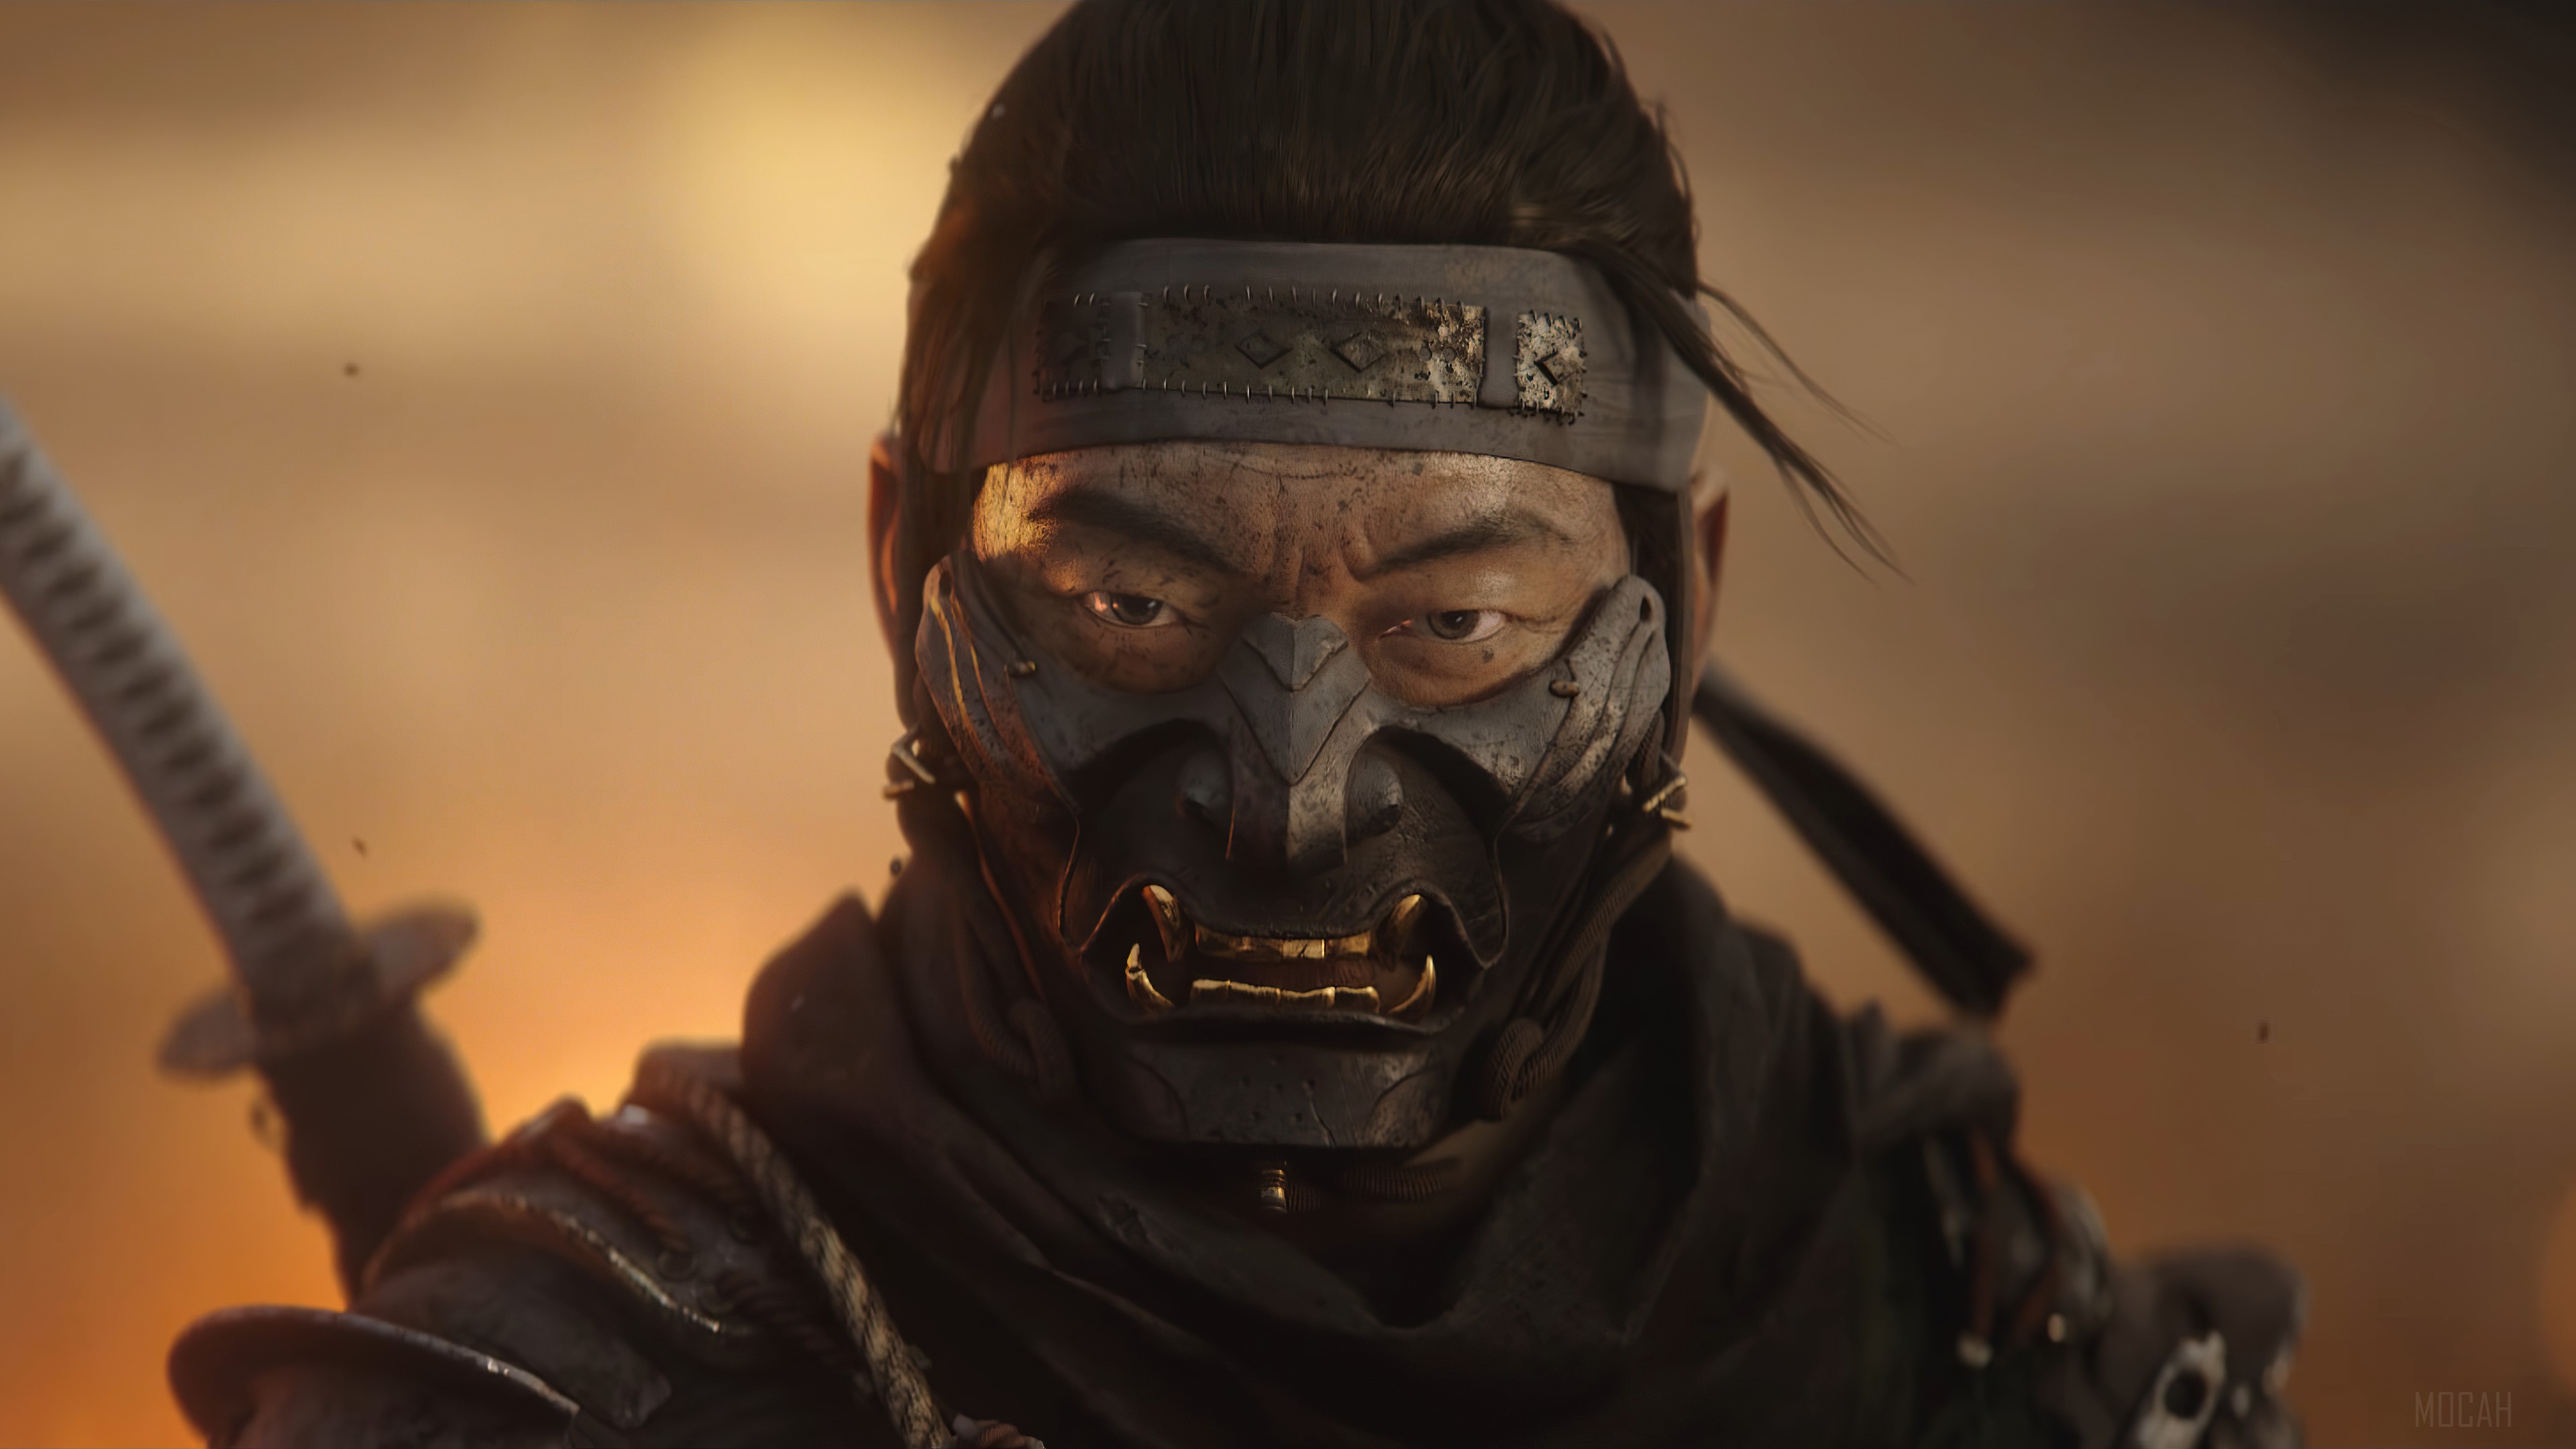 Aesthetic Ghost Of Tsushima Mask Wallpapers - Wallpaper Cave